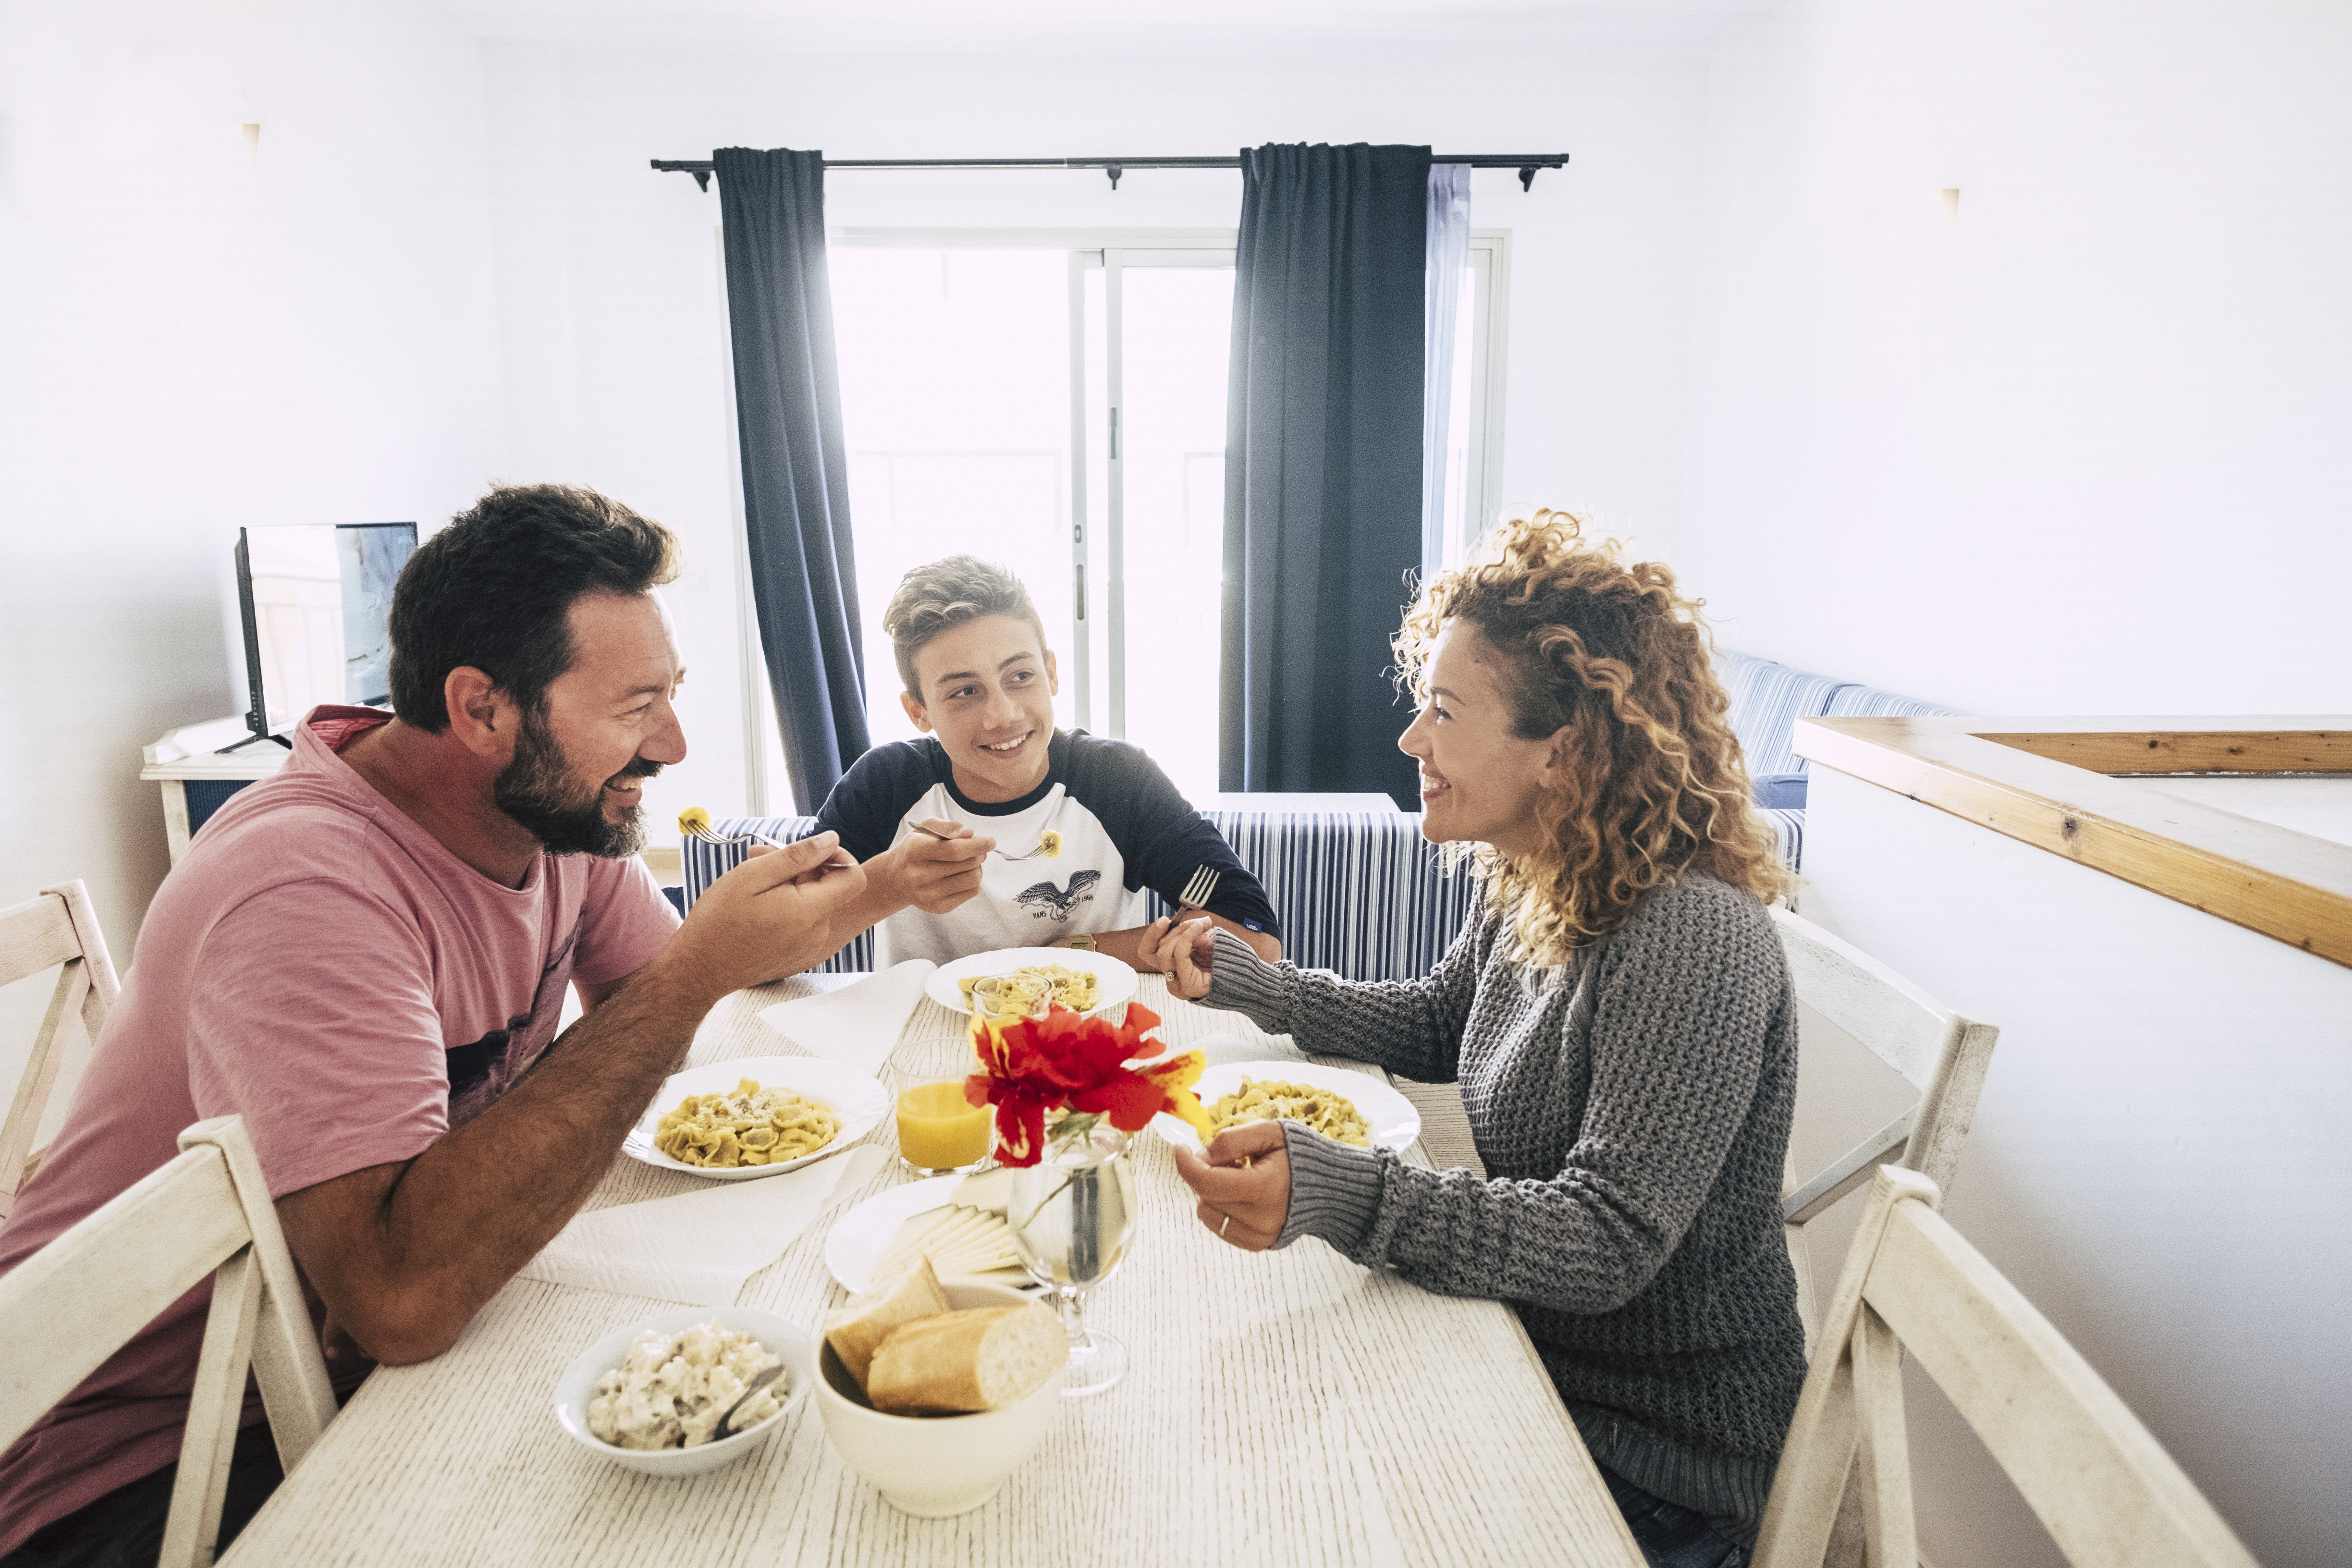 6 Ways To Establish An Intentional Family Culture